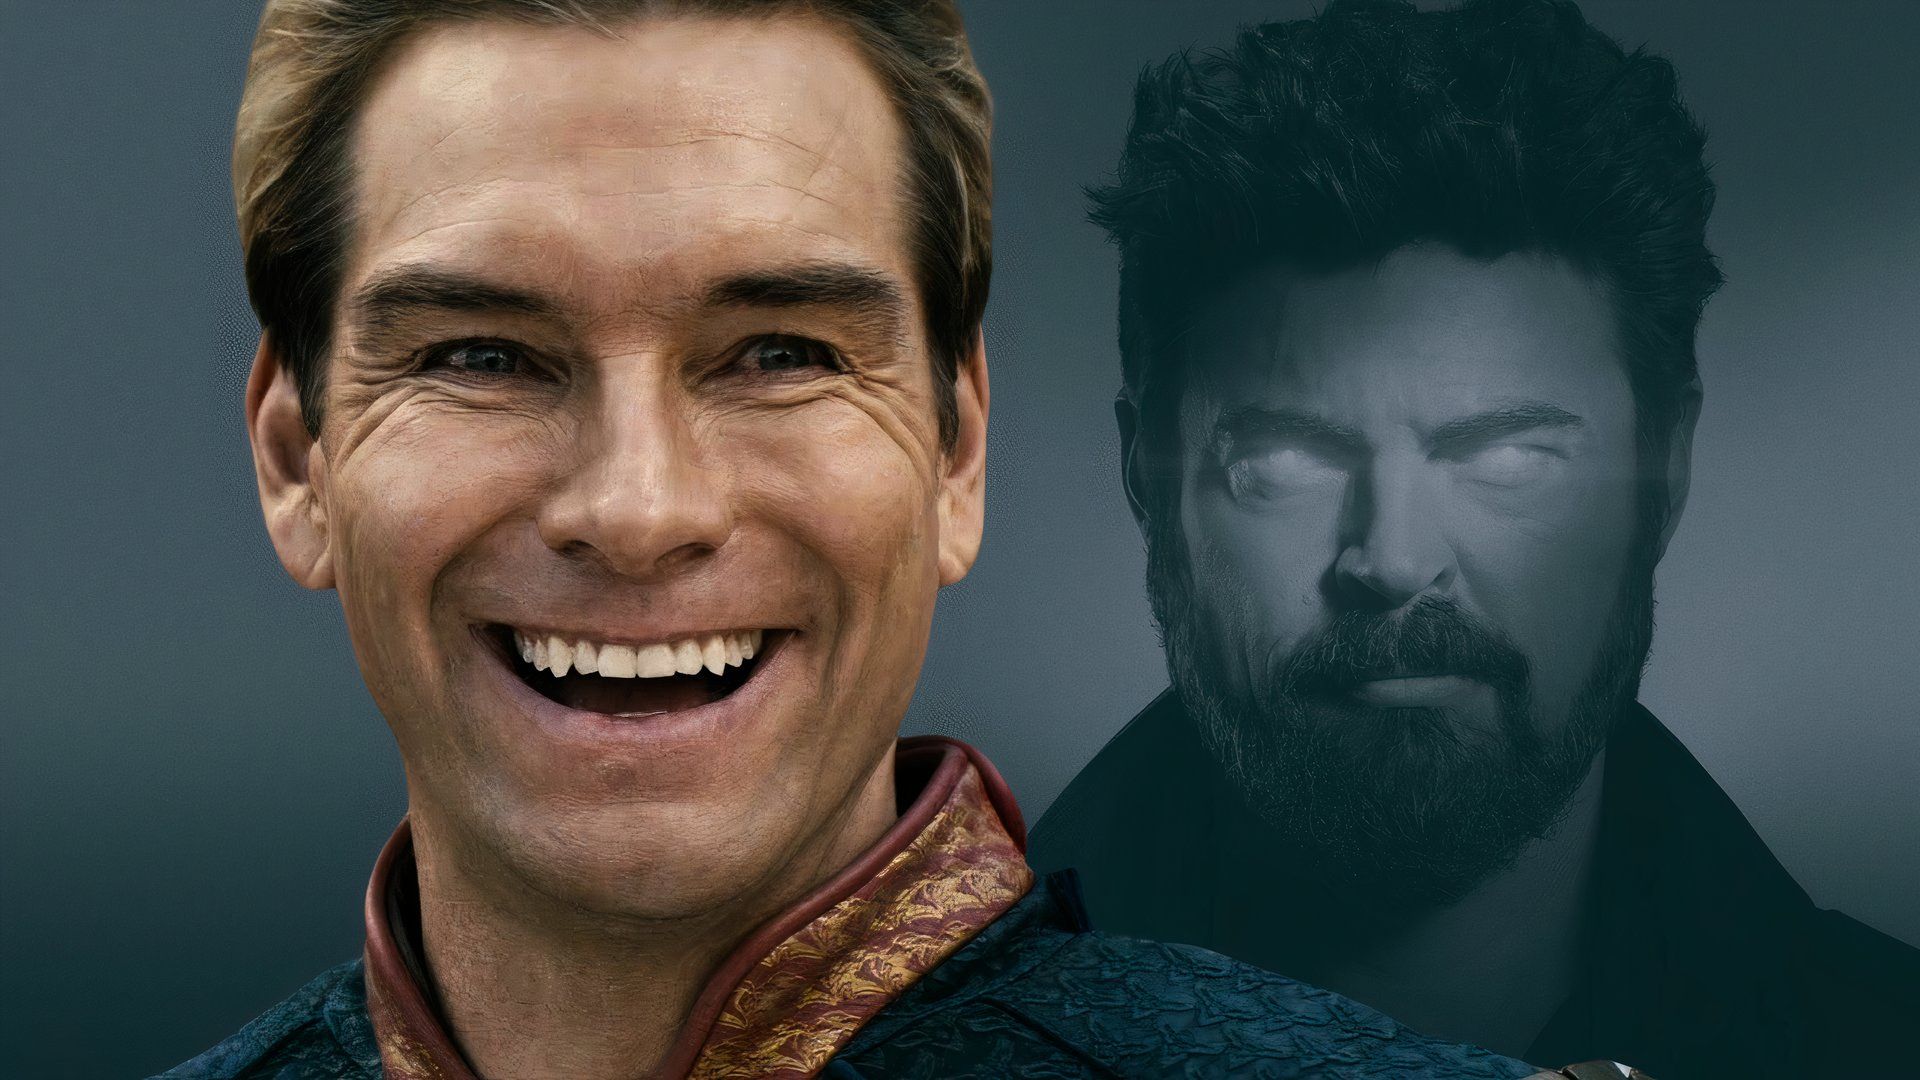 An edited image of Homelander and Butcher together in The Boys